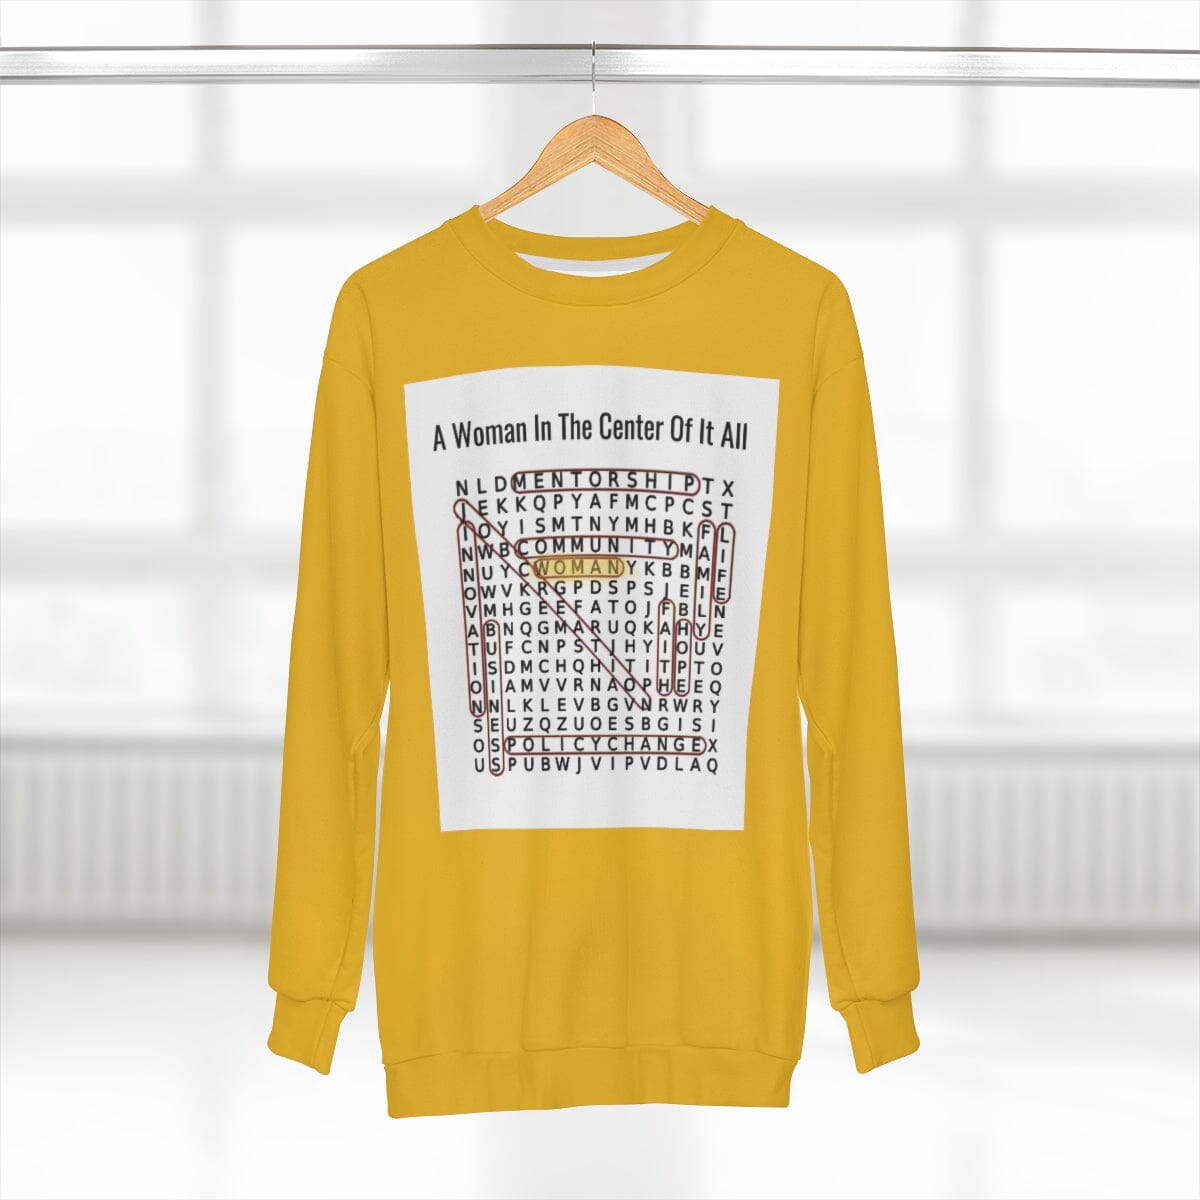 "A Woman in the Center of It All" Sweatshirt